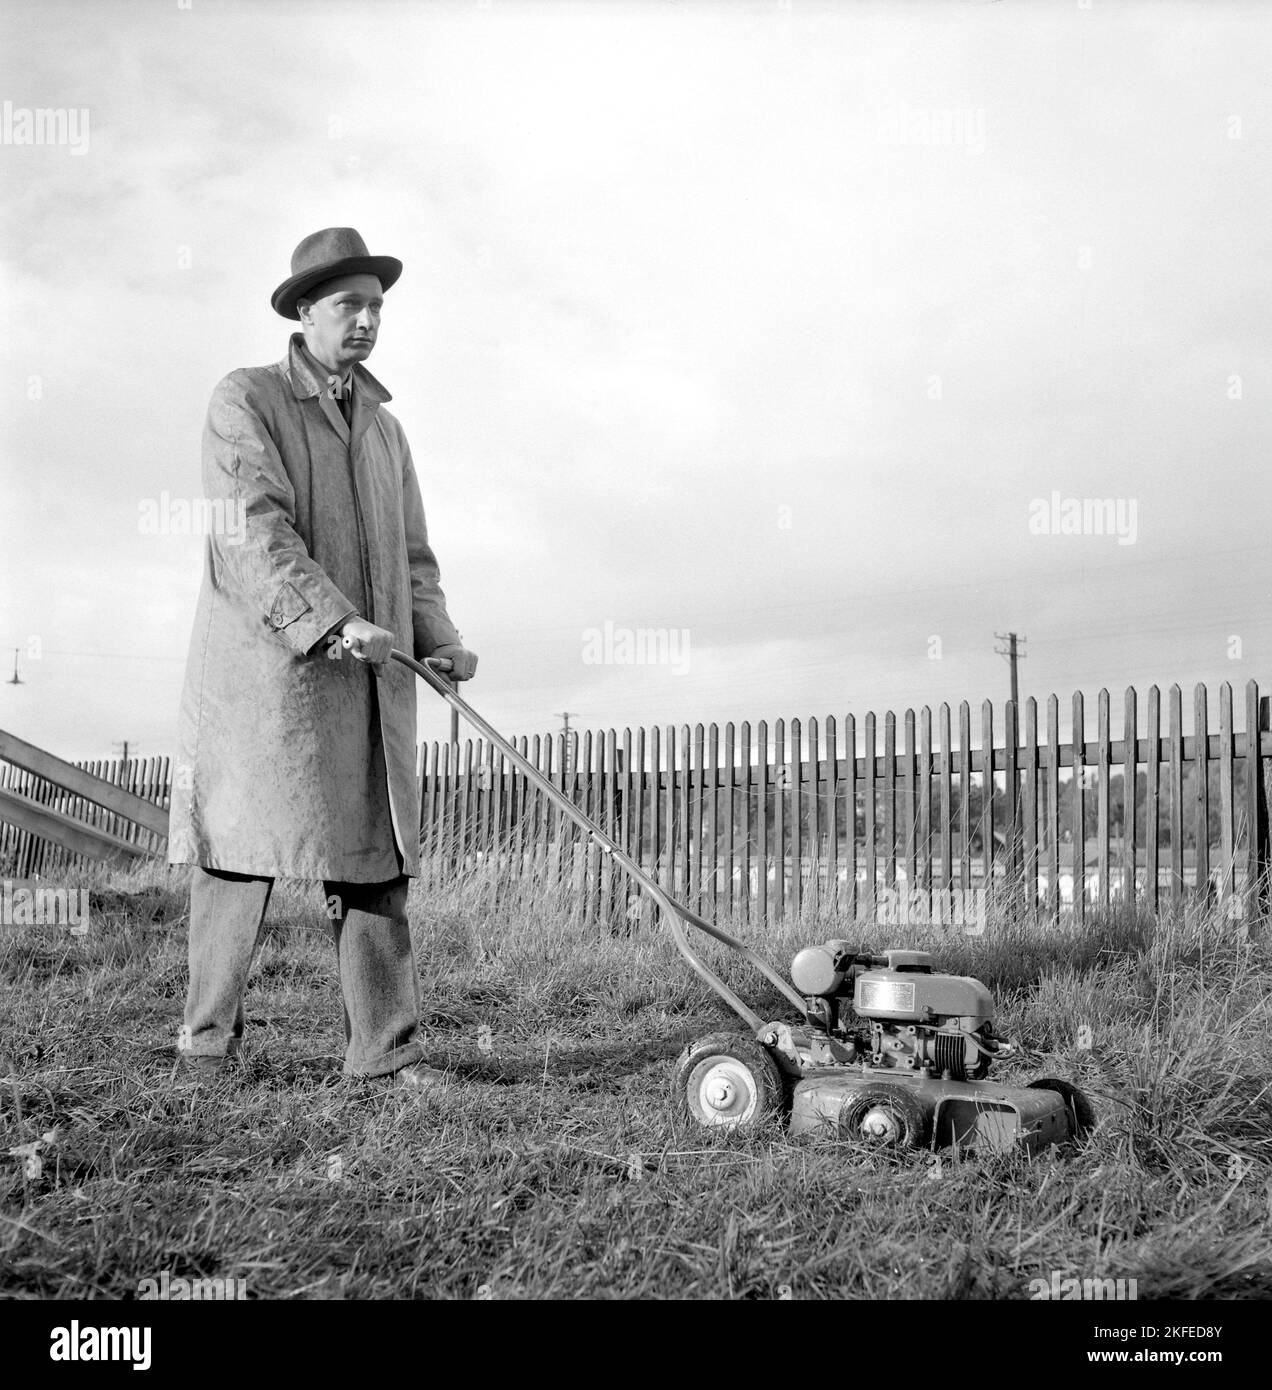 Garden equipment of the 1950s. A motor driven lawn mover. A man is seen moving the lawn, cutting the grass. He's in the leisure clothes of the decade, coat and hat, not looking too happy. Sweden 1955 Stock Photo